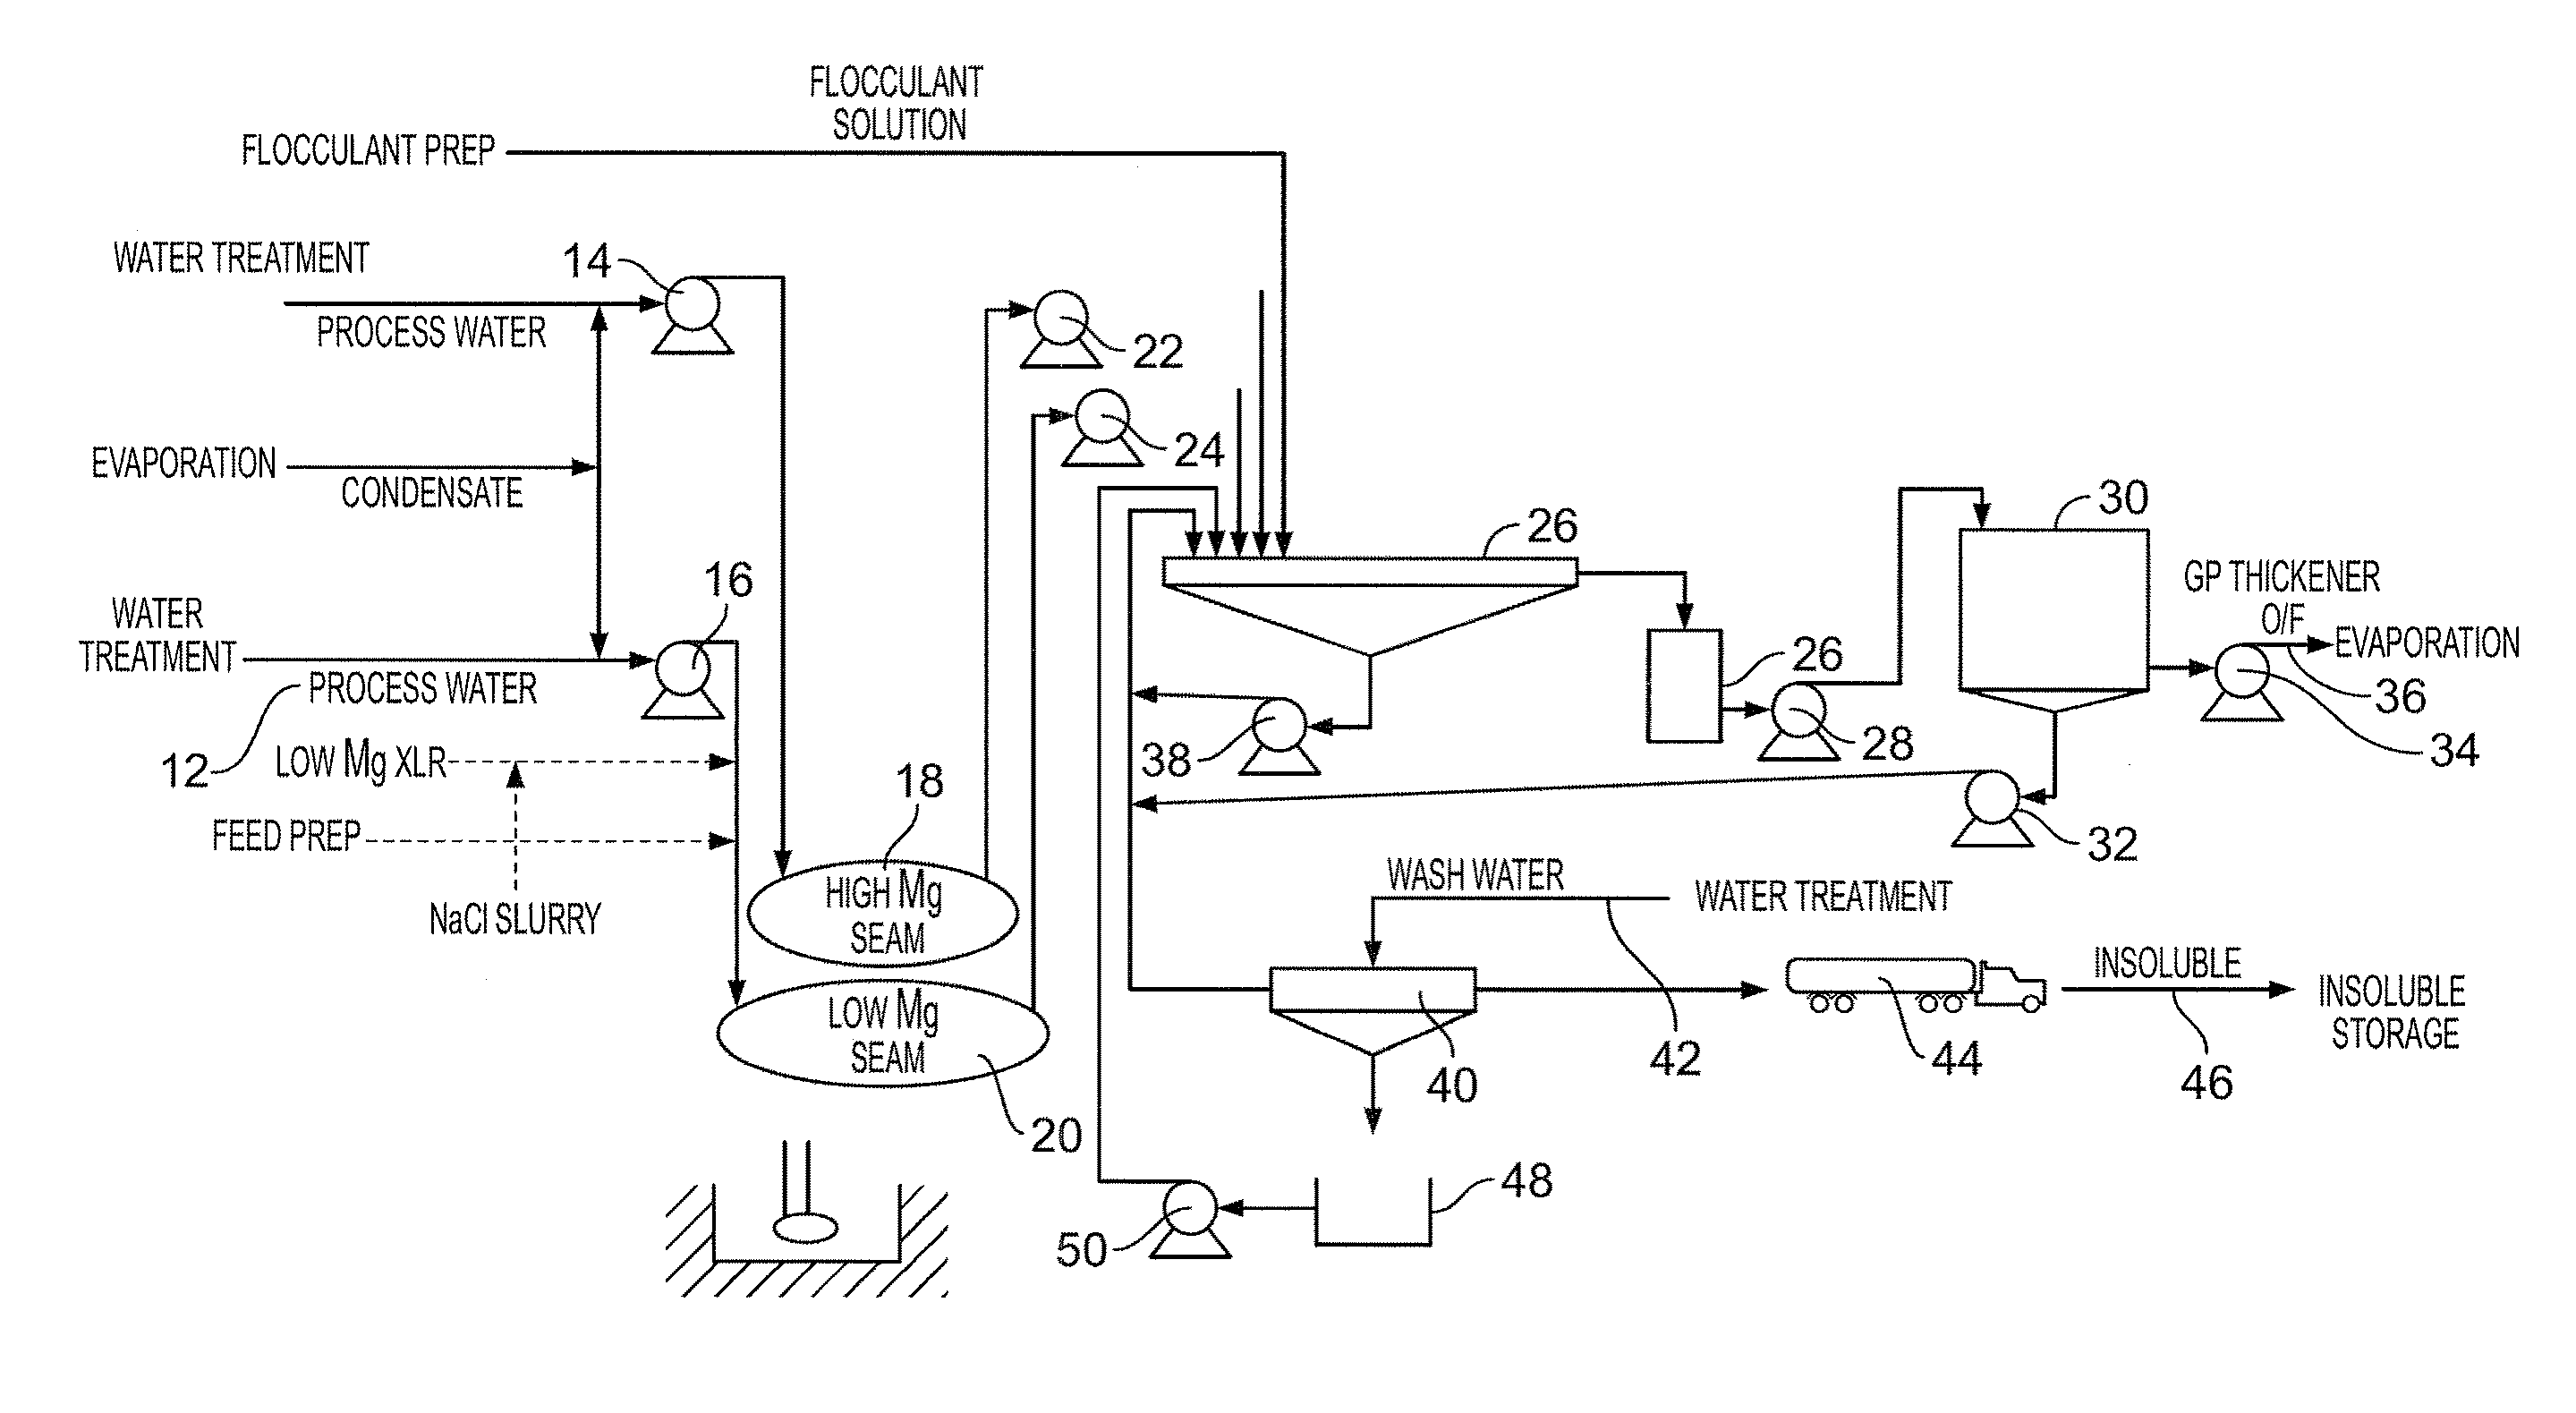 Process for the formulation of potassium chloride from a carnallite source